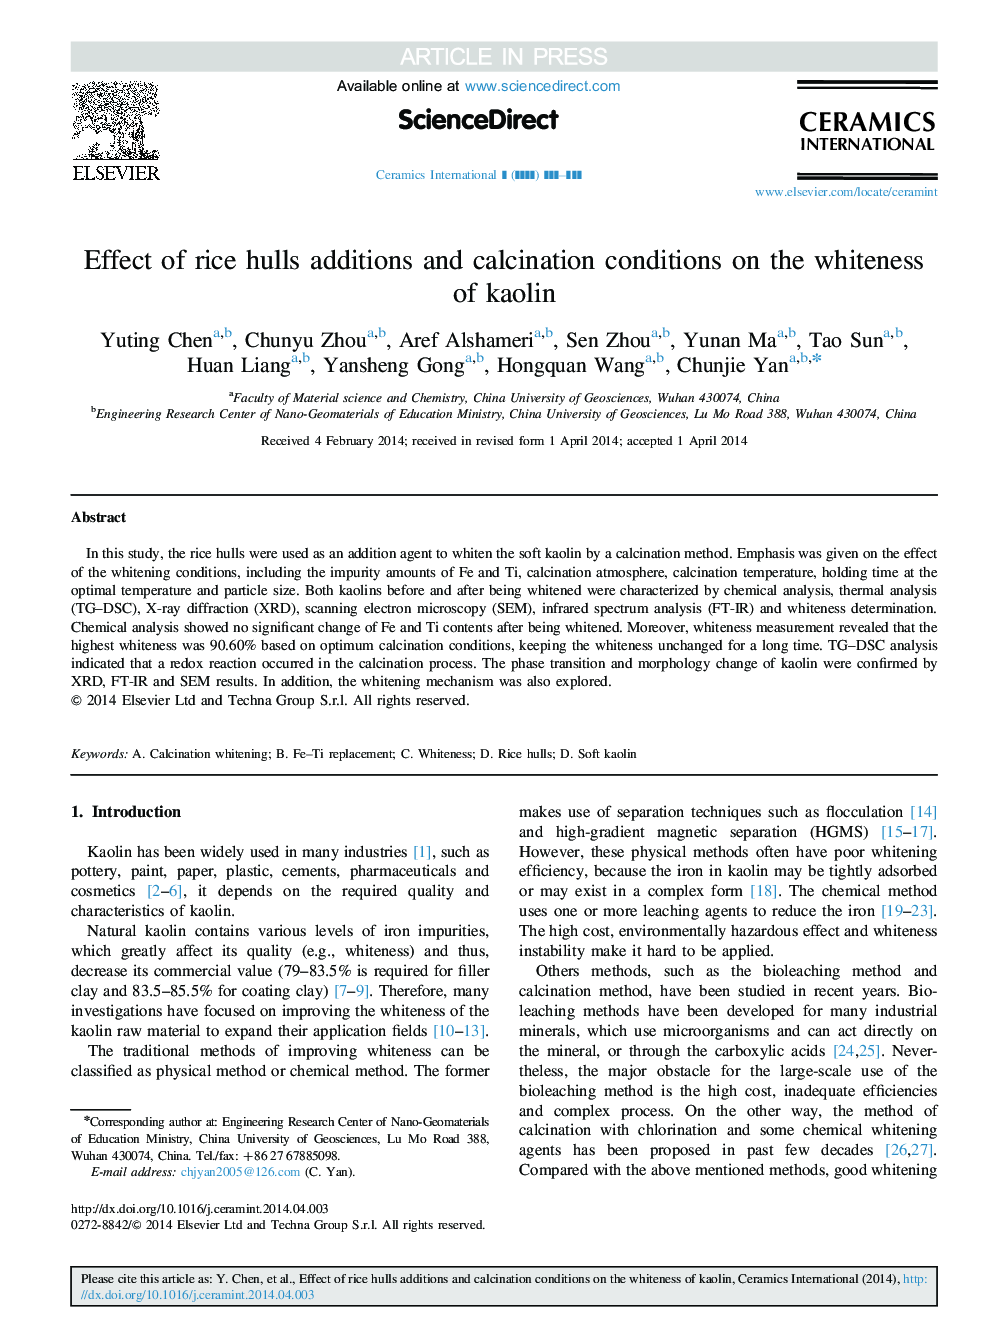 Effect of rice hulls additions and calcination conditions on the whiteness of kaolin